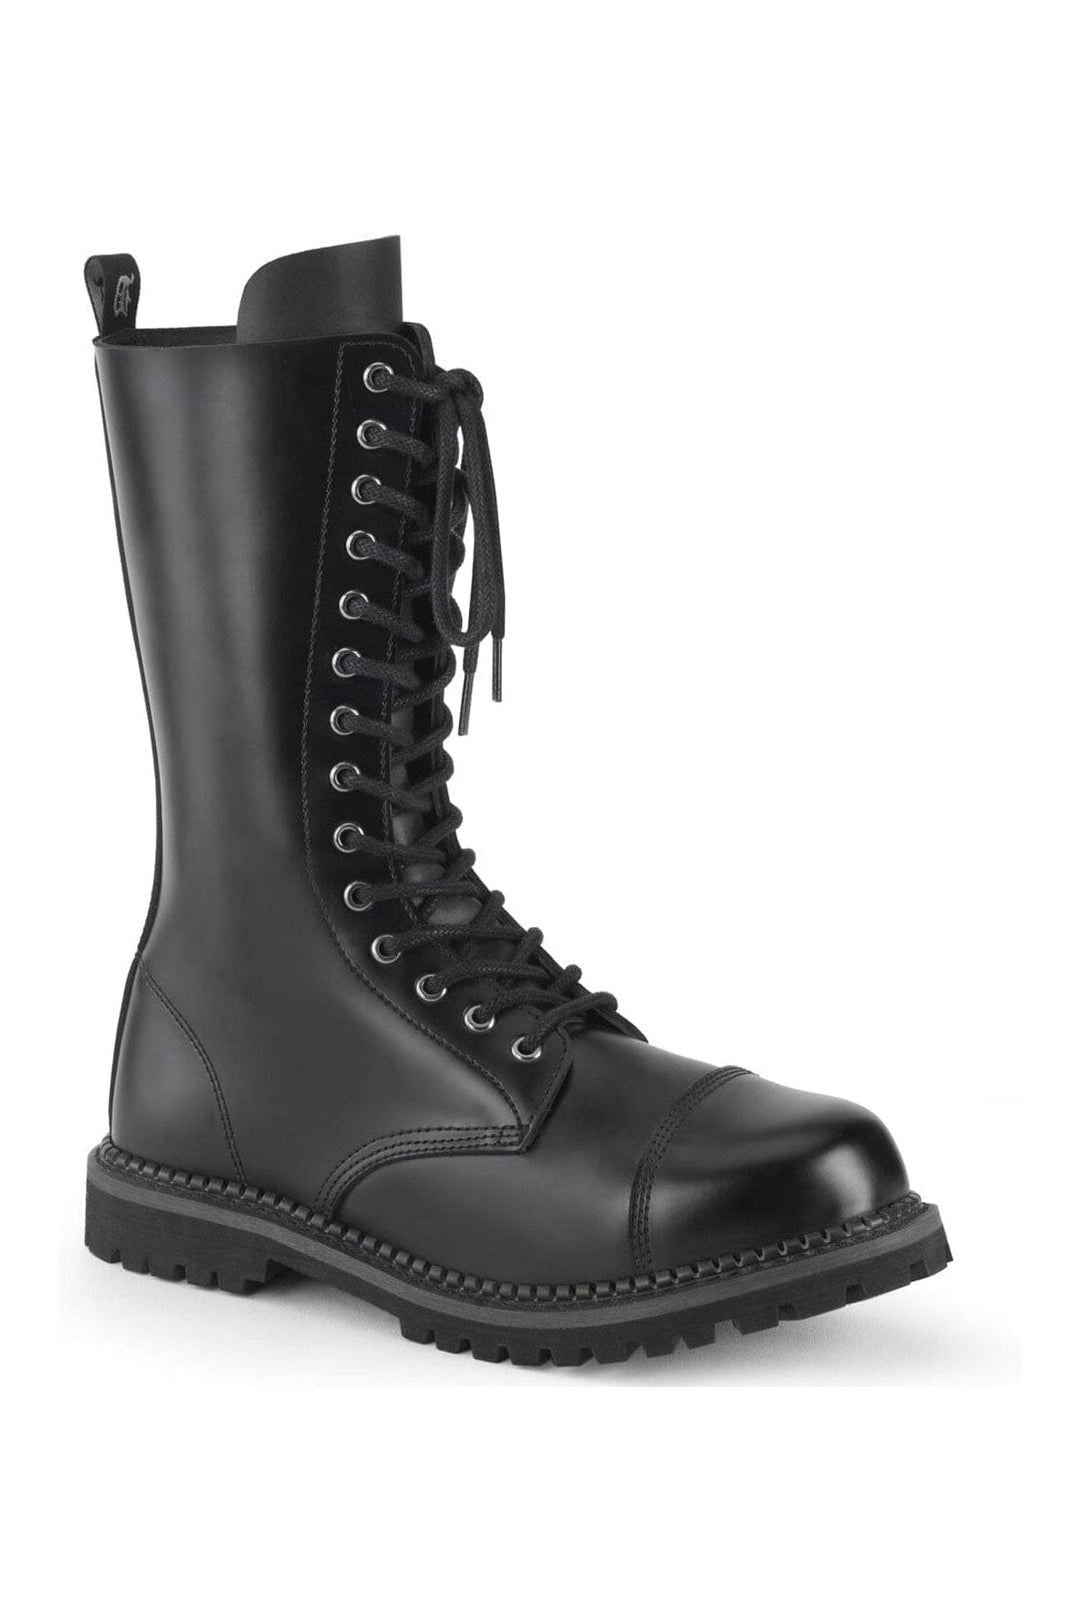 RIOT-14 Black Leather Knee Boot-Knee Boots-Demonia-Black-10-Leather-SEXYSHOES.COM